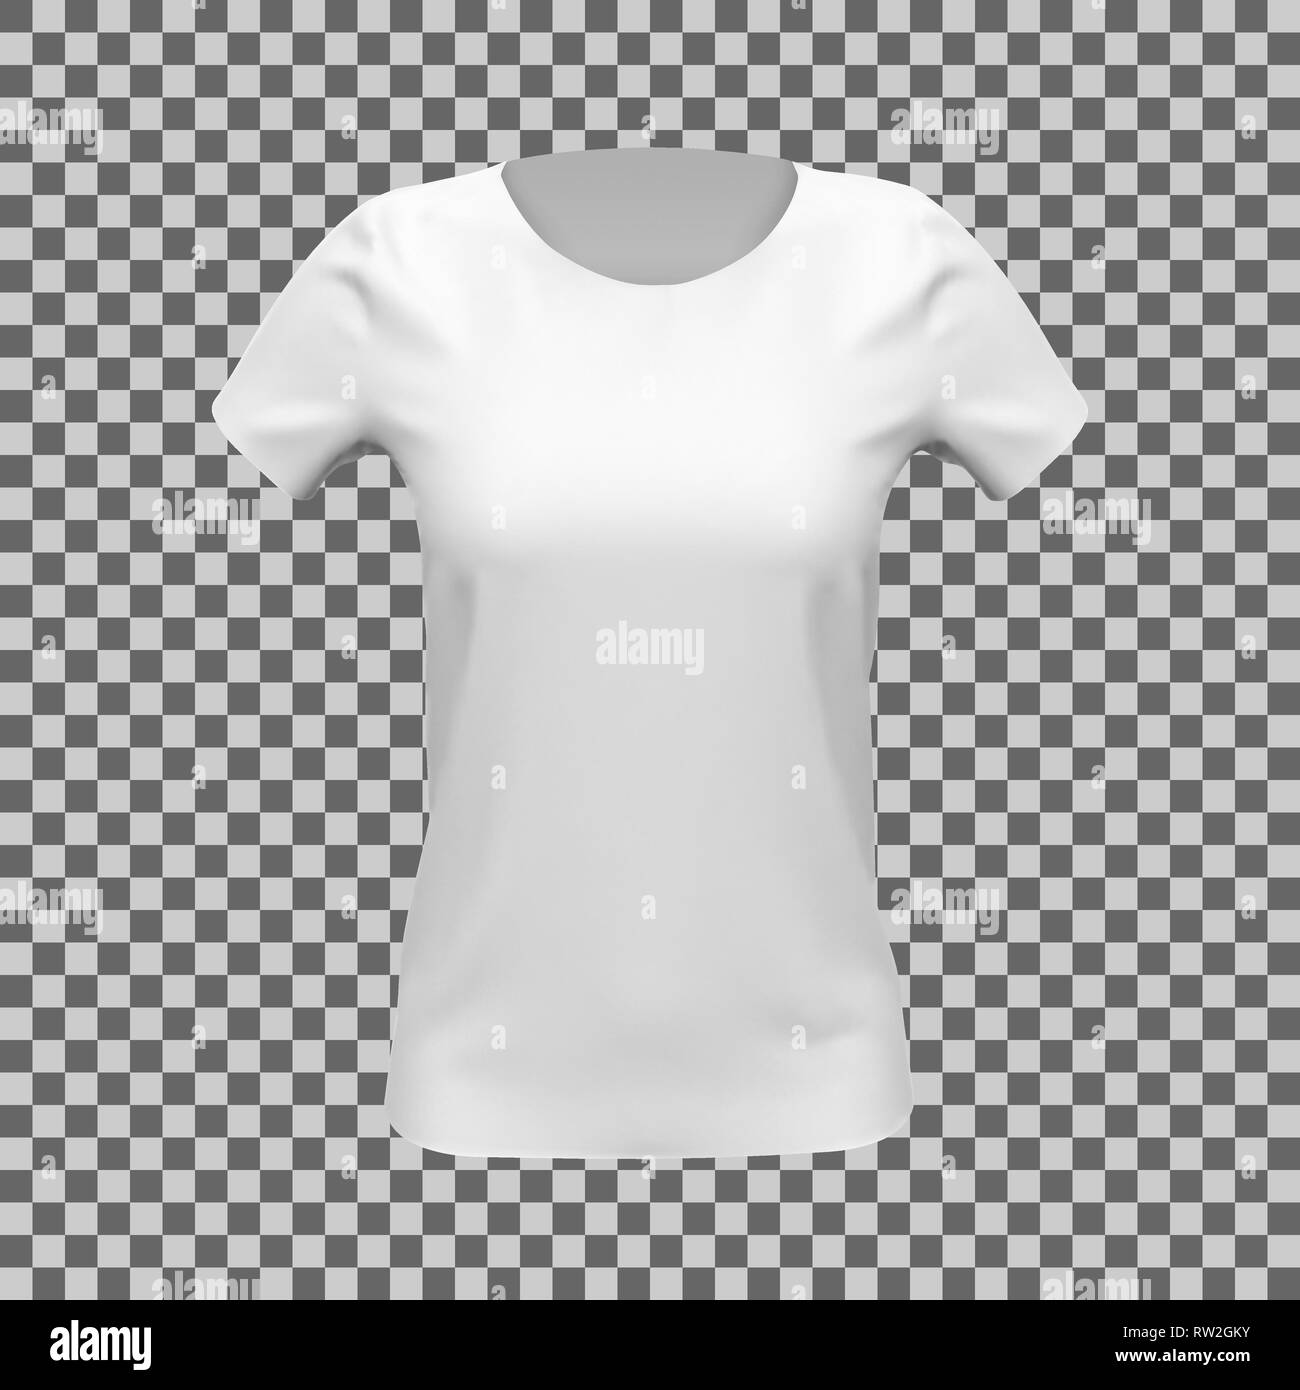 Blank mockup of white basic women t-shirt, front view, on checkered background. Vector illustration Stock Vector